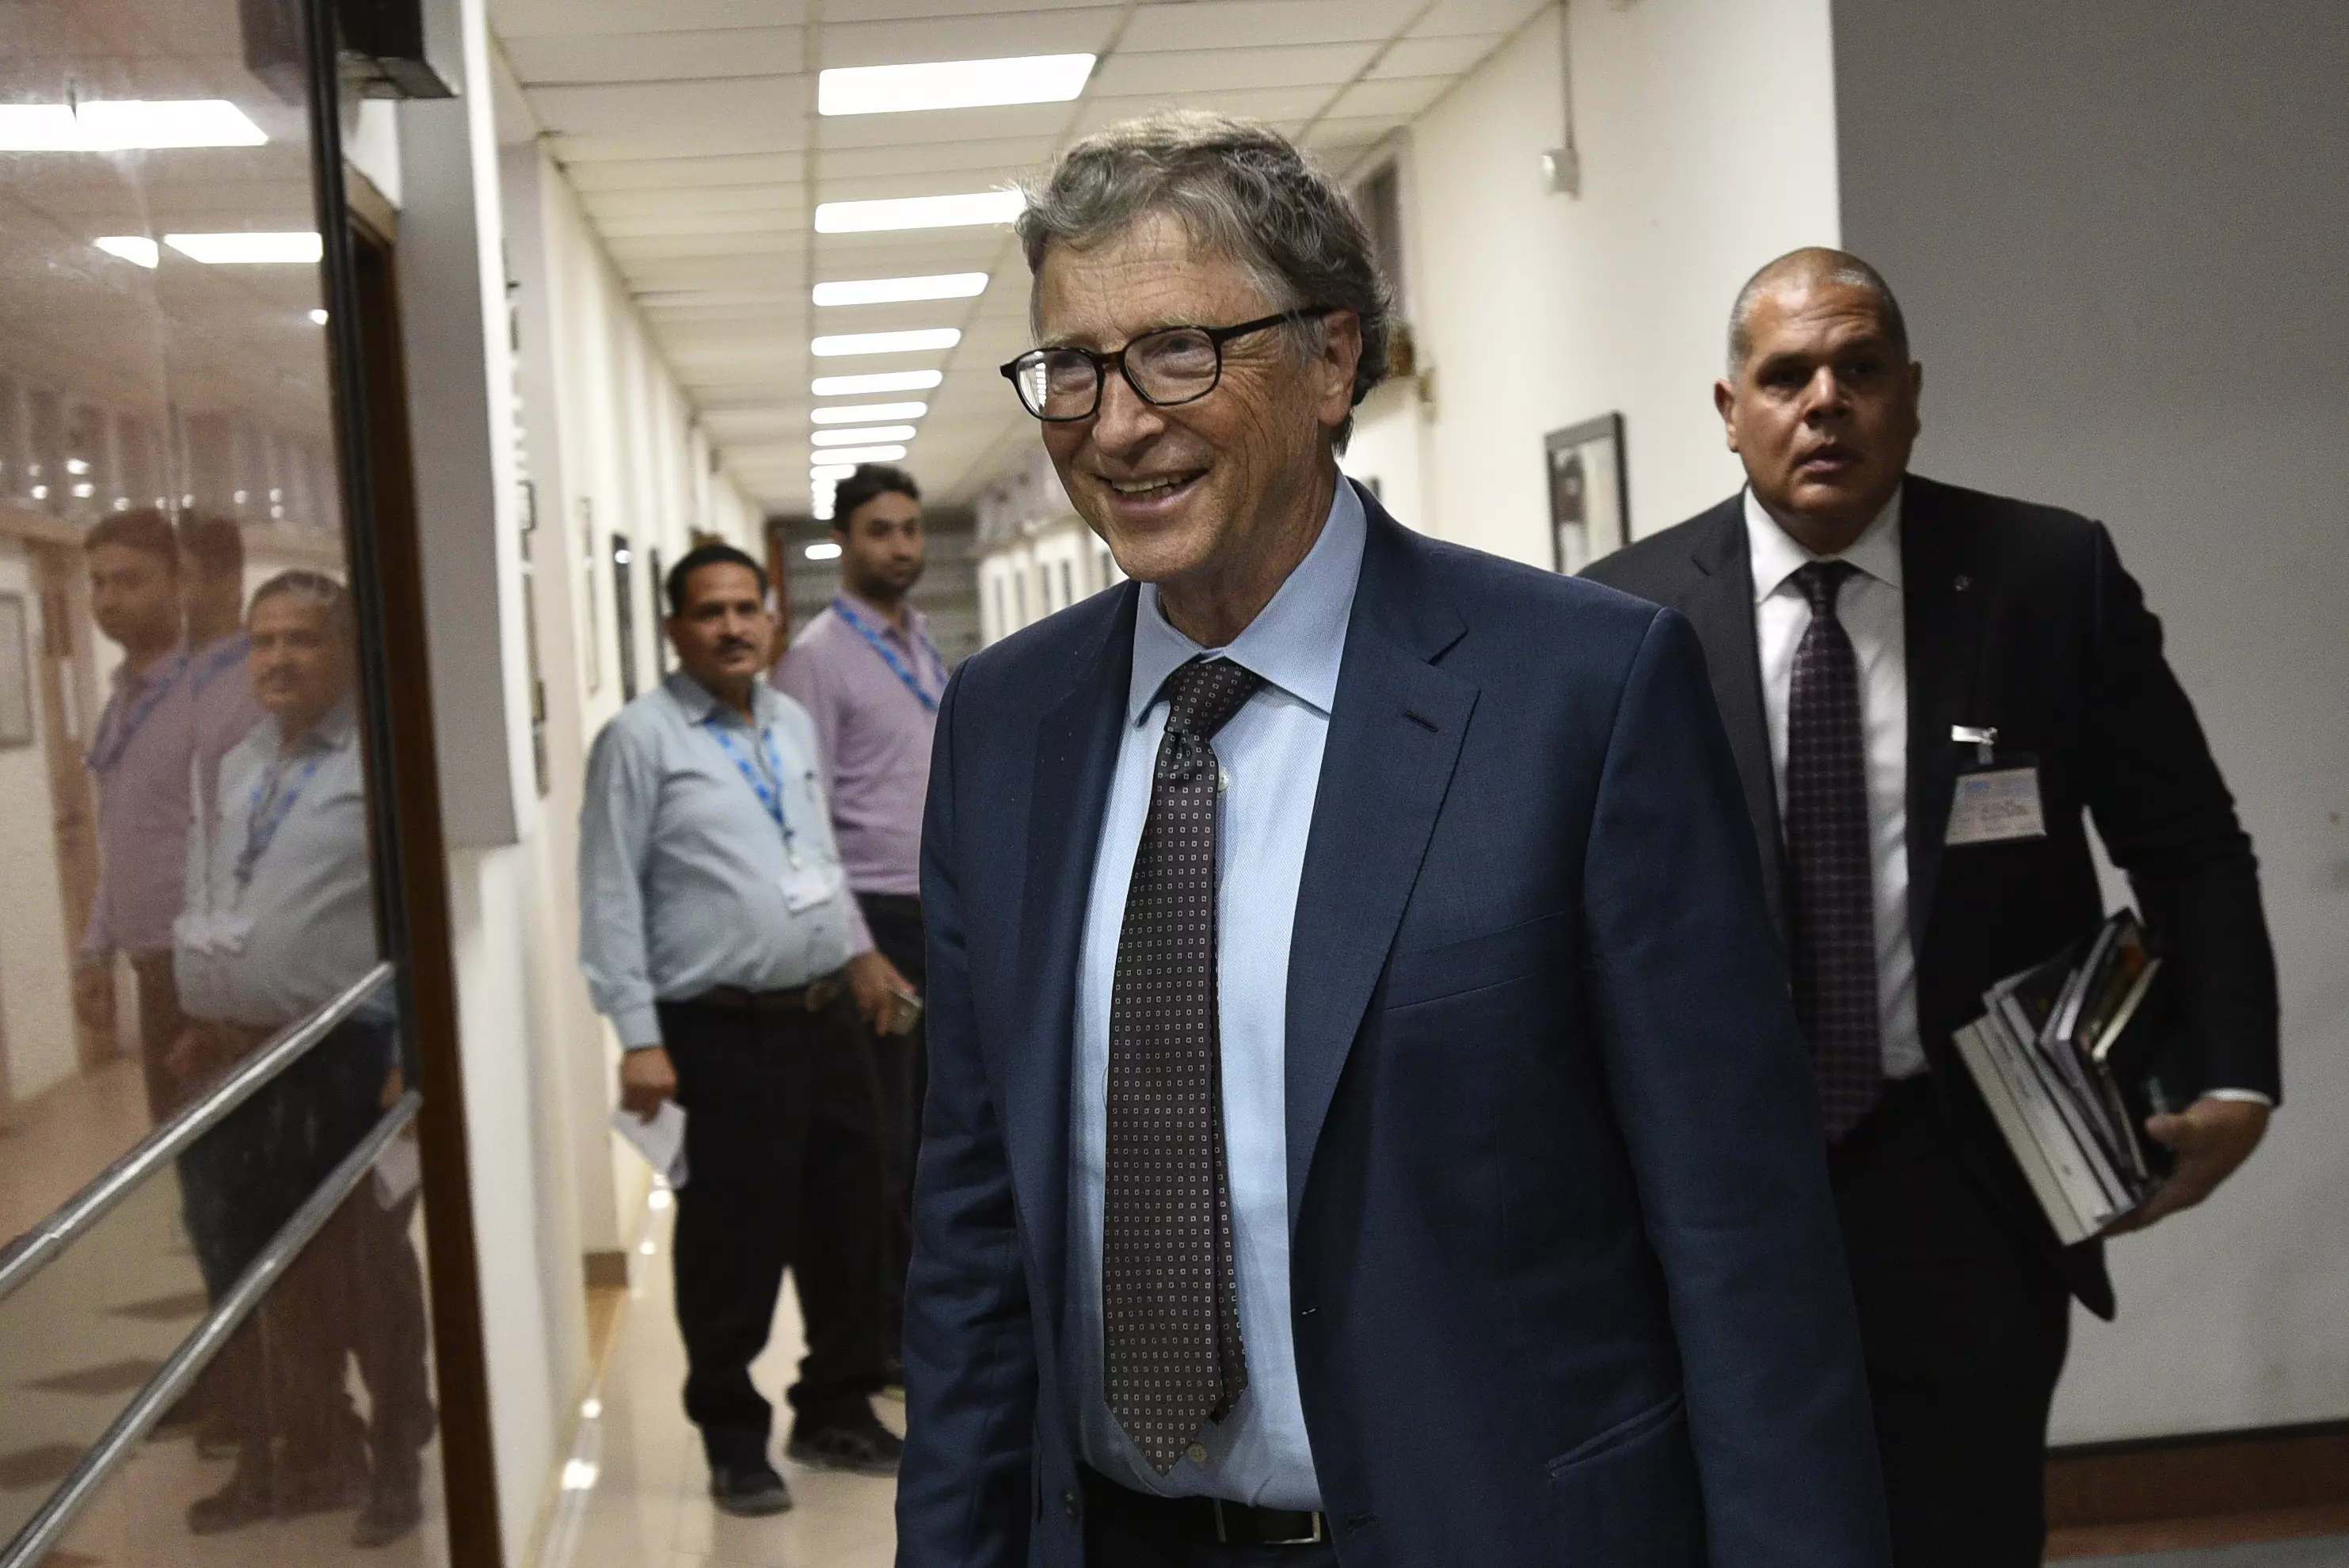 Bill Gates has dismissed conspiracy theories about him.